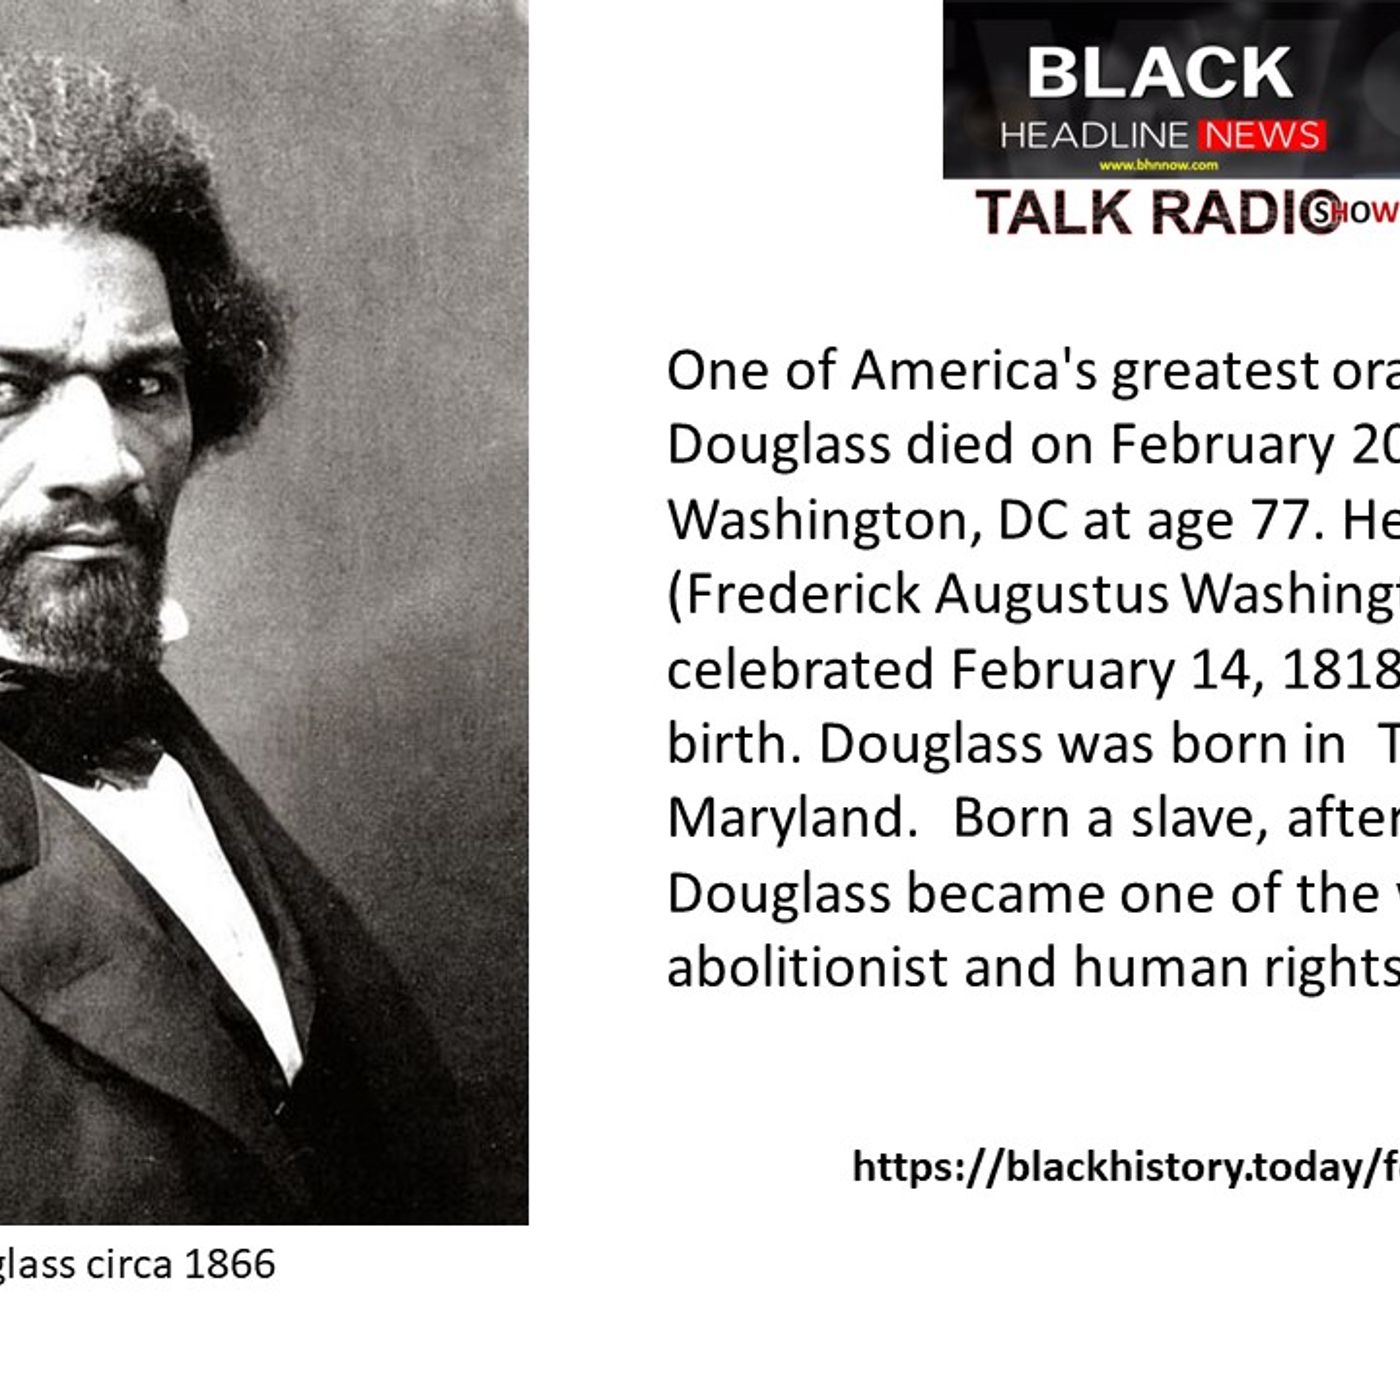 BHN Talk Radio Show 2-20-24-PART 3:  TODAY IN BLACK HISTORY:  Frederick Douglass died on February 20, 1895 in Washington, DC at age 77.